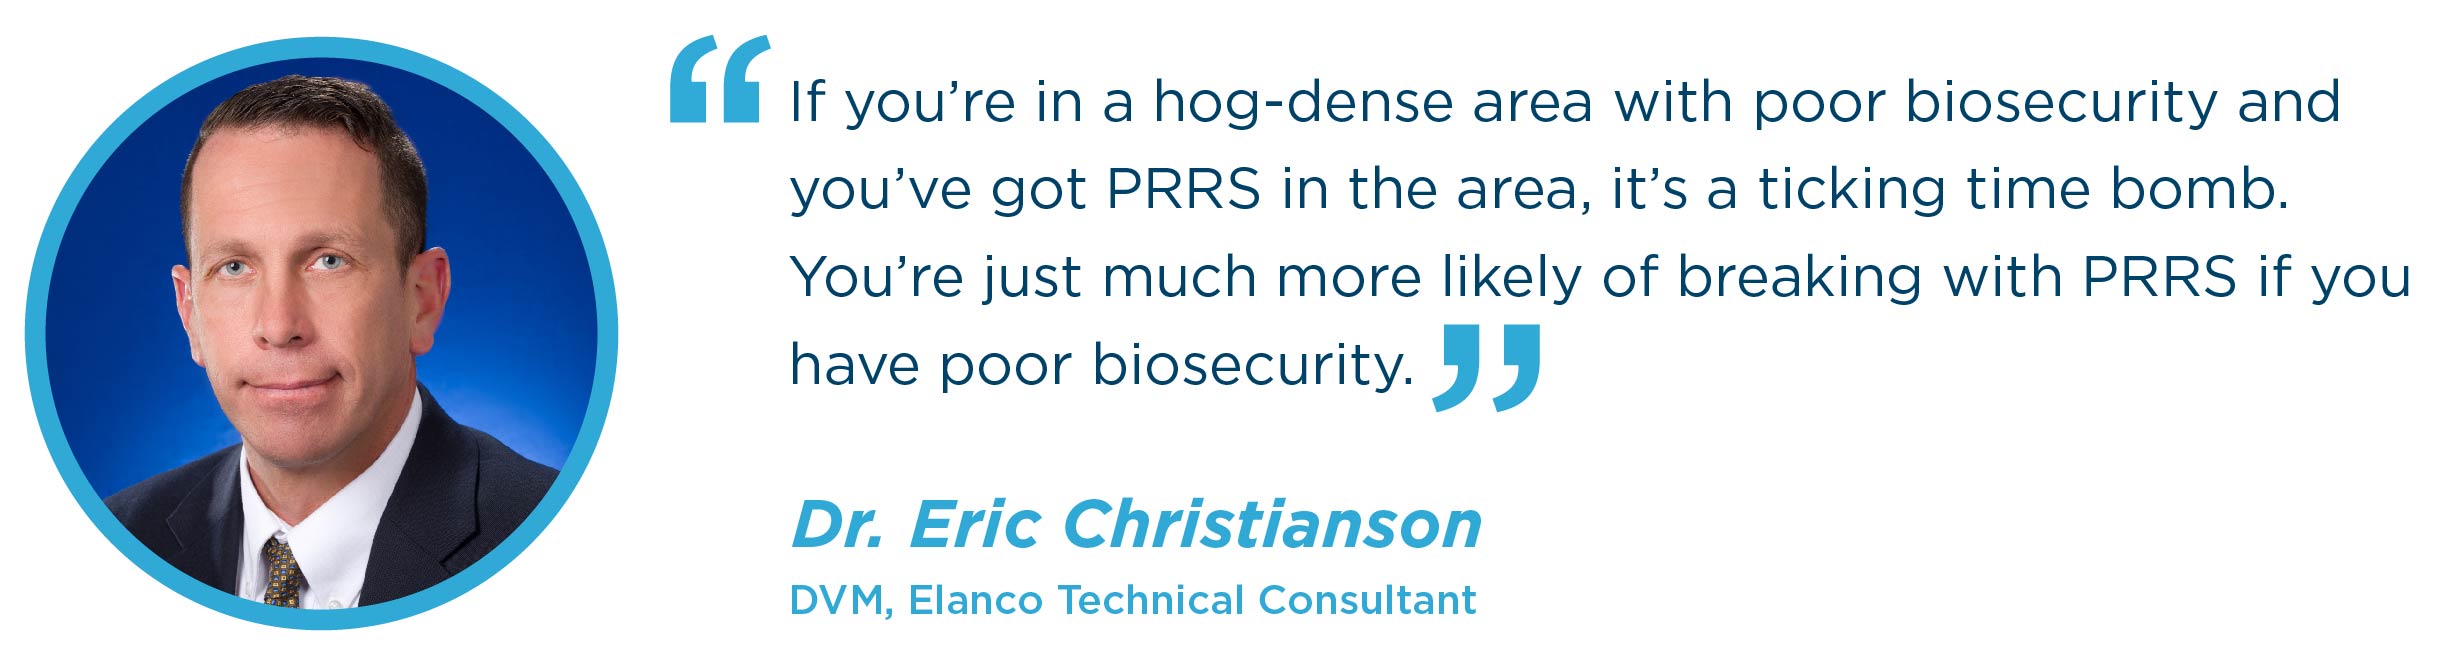 If you’re in a hog-dense area with poor biosecurity and you’ve got PRRS in the area, it’s a ticking time bomb. You’re just much more likely of breaking with PRRS if you have poor biosecurity. Dr. Eric Christianson DVM, Elanco Technical Consultant